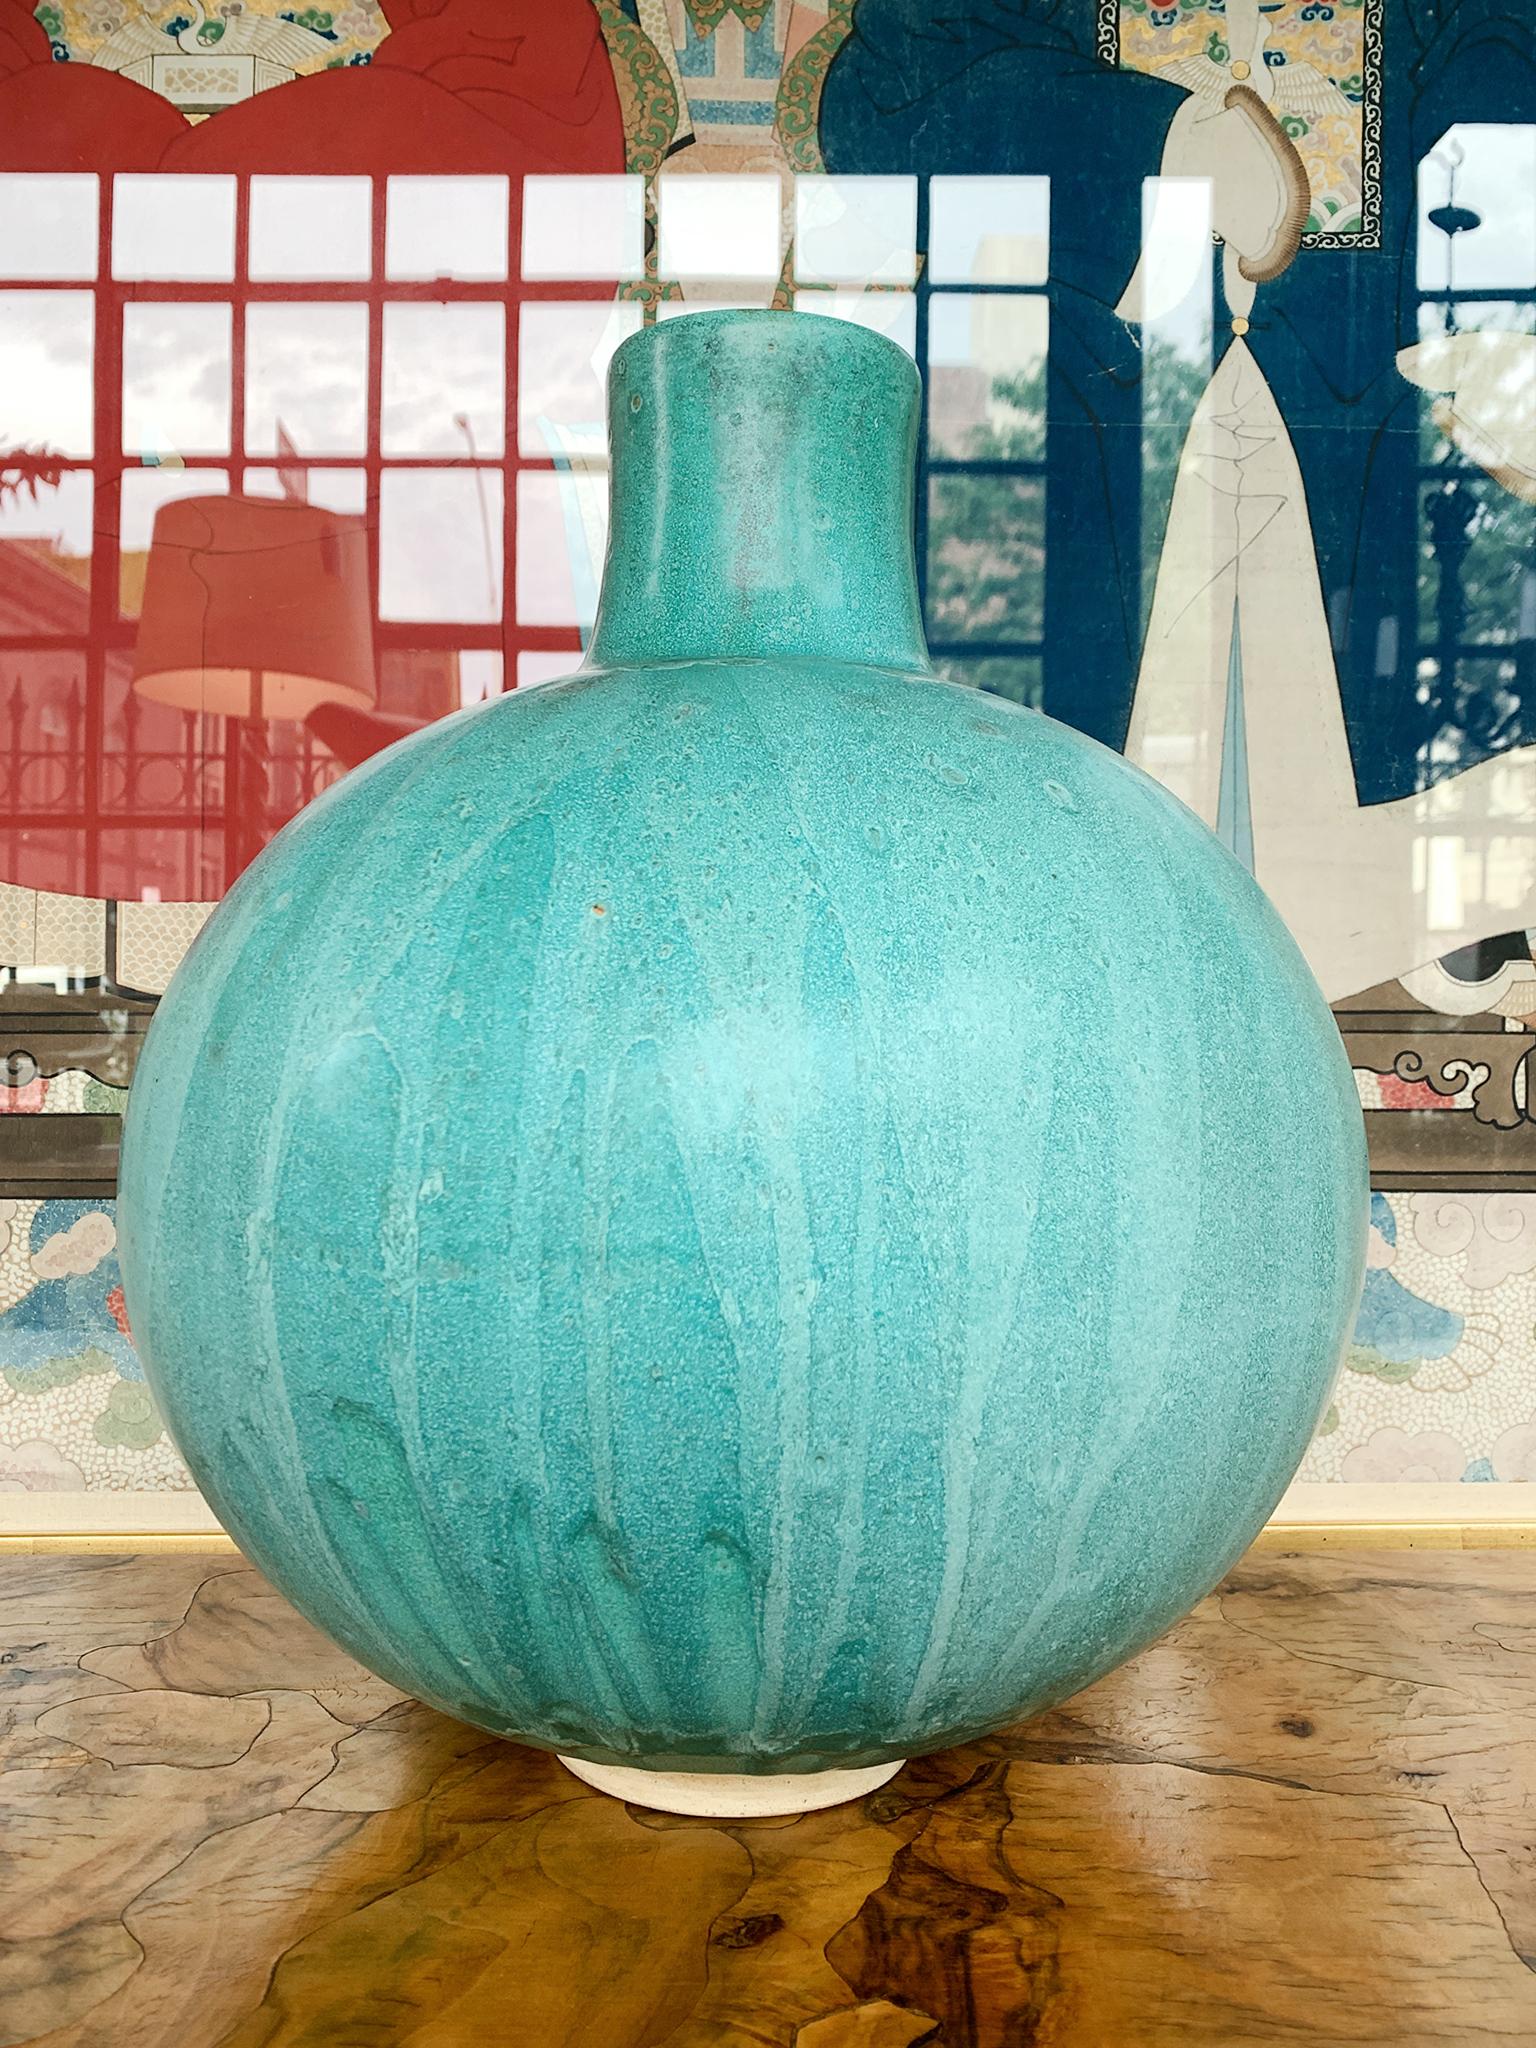 From Thom Lussier's Oxidized Copper Collection - a series of ceramic vessels that stand out for their brilliant palette and rich textures. This vessel is spherical in form with a long neck.

White stoneware with Cone 6 glaze.

Dimensions:
13